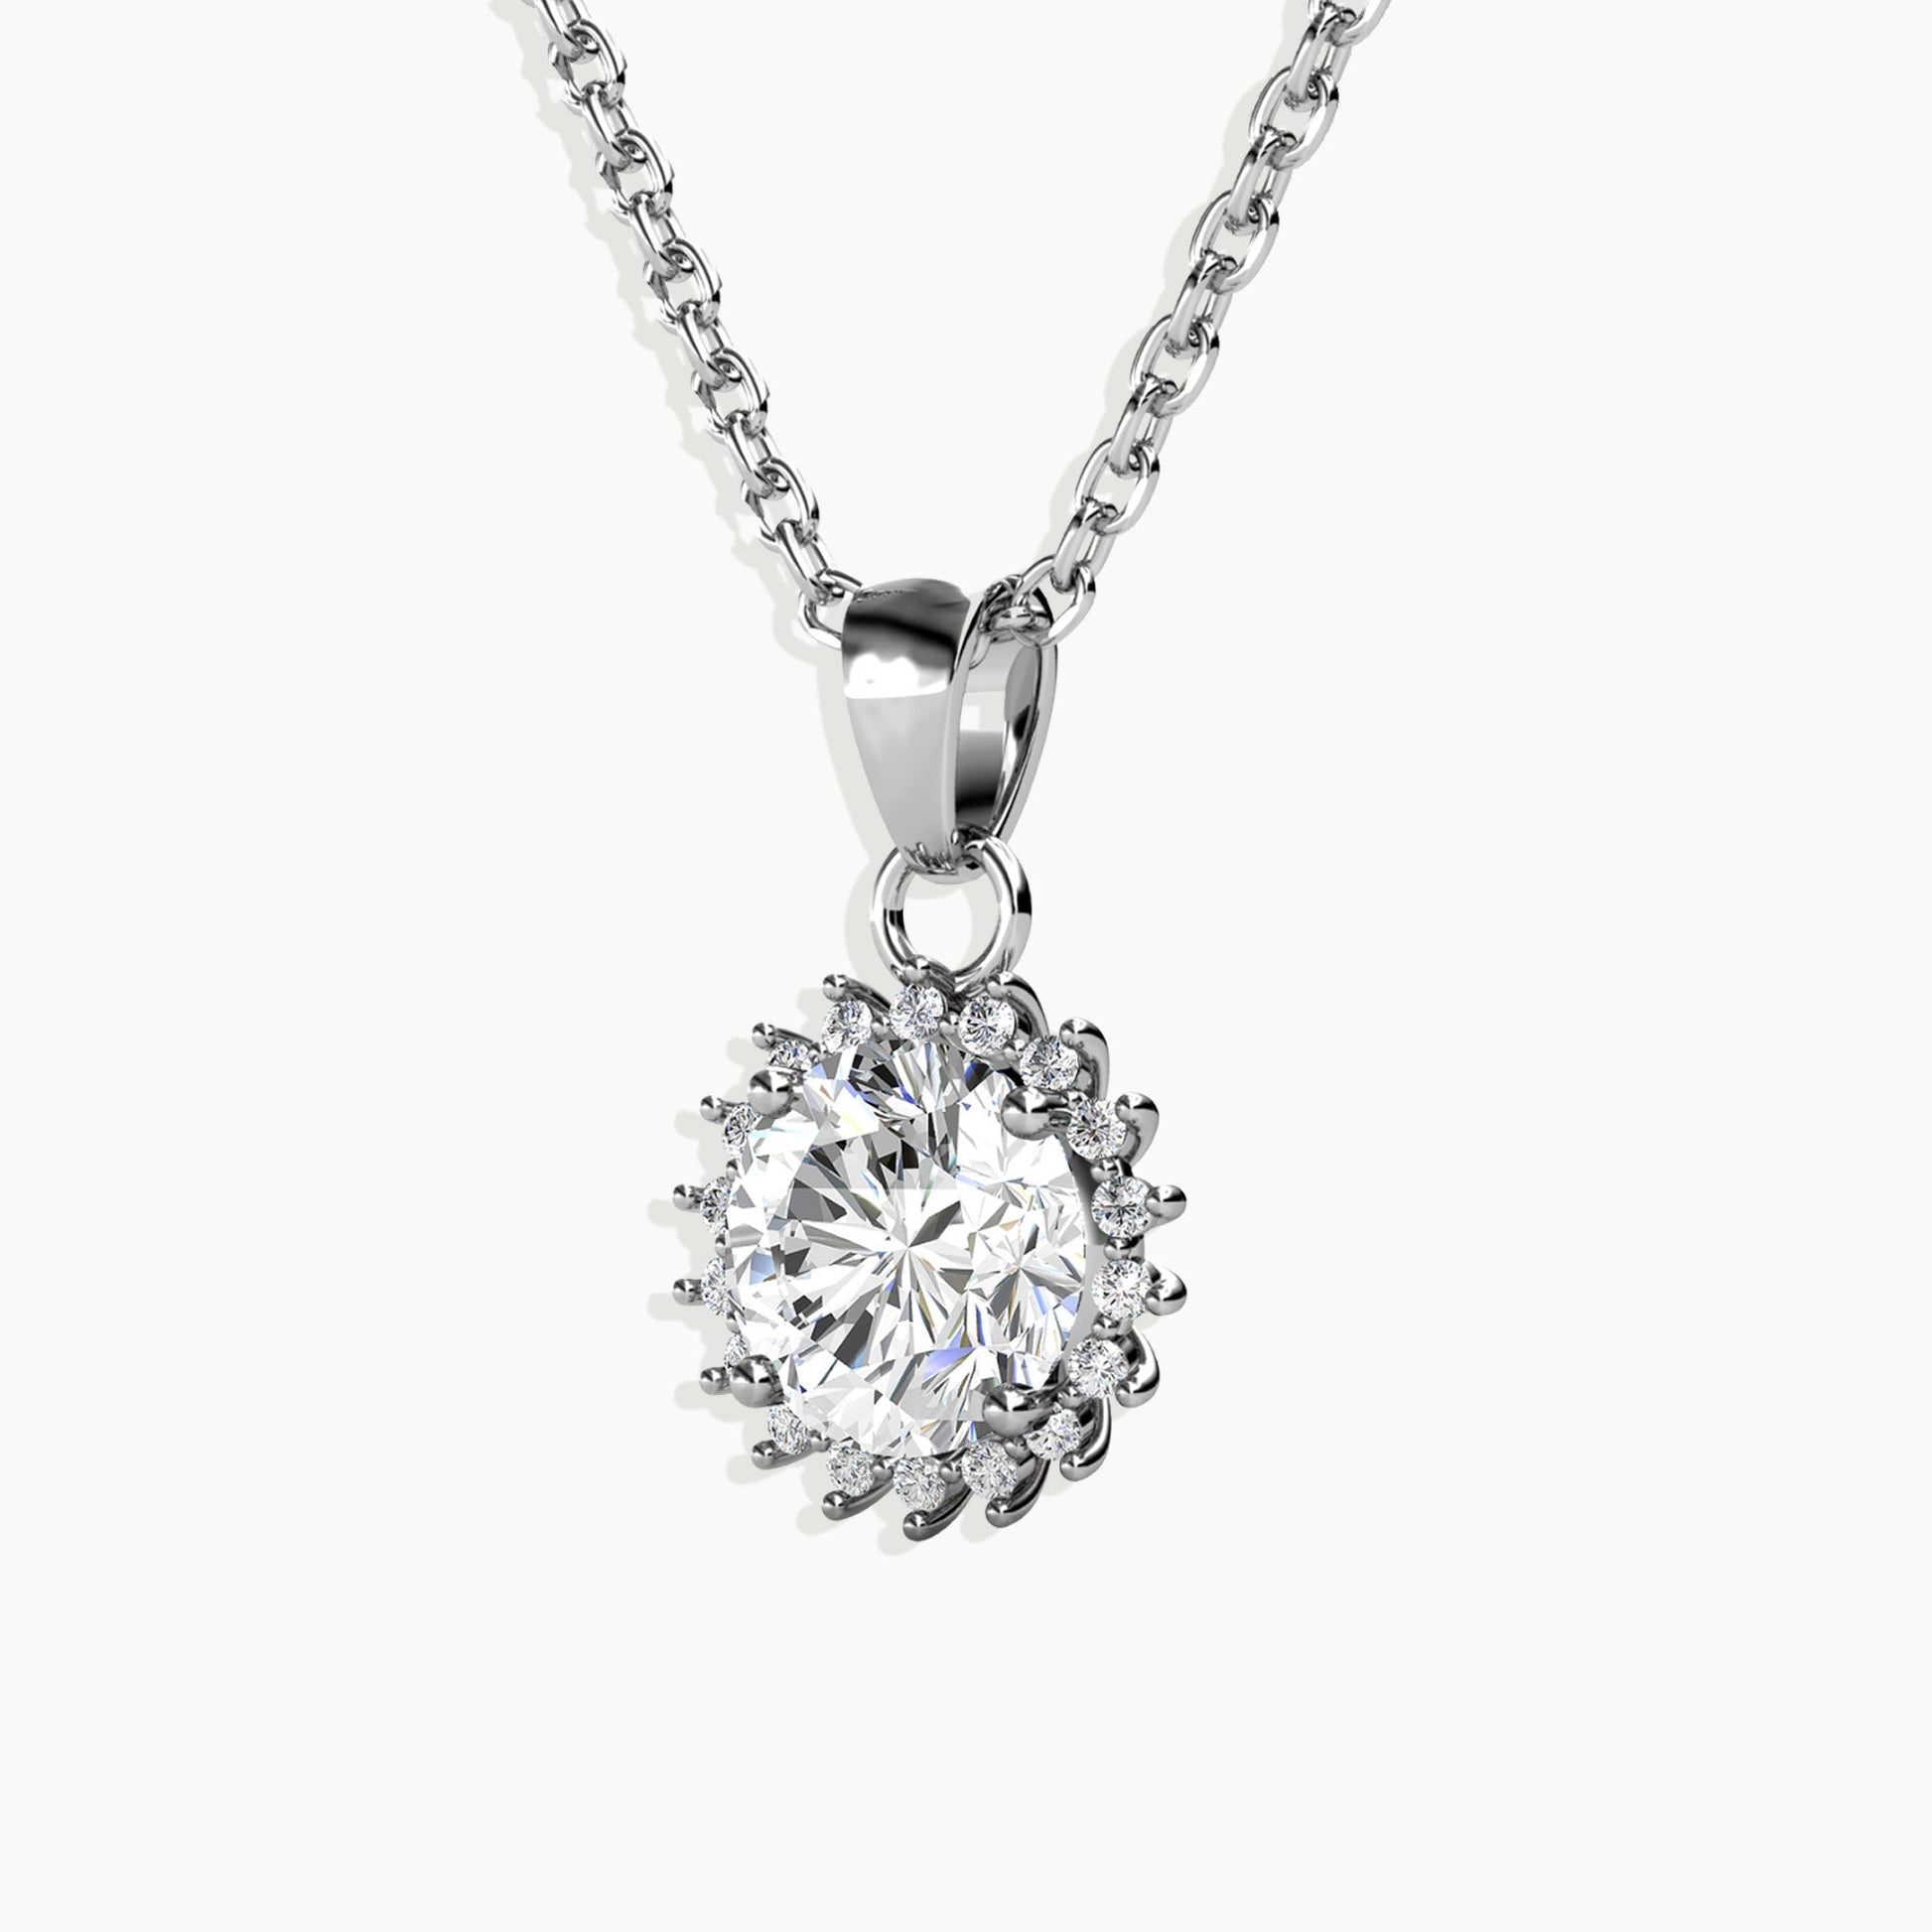 close up Side view of the Moissanite 1ct. Circle Pendant Necklace, displaying its sleek and elegant profile.